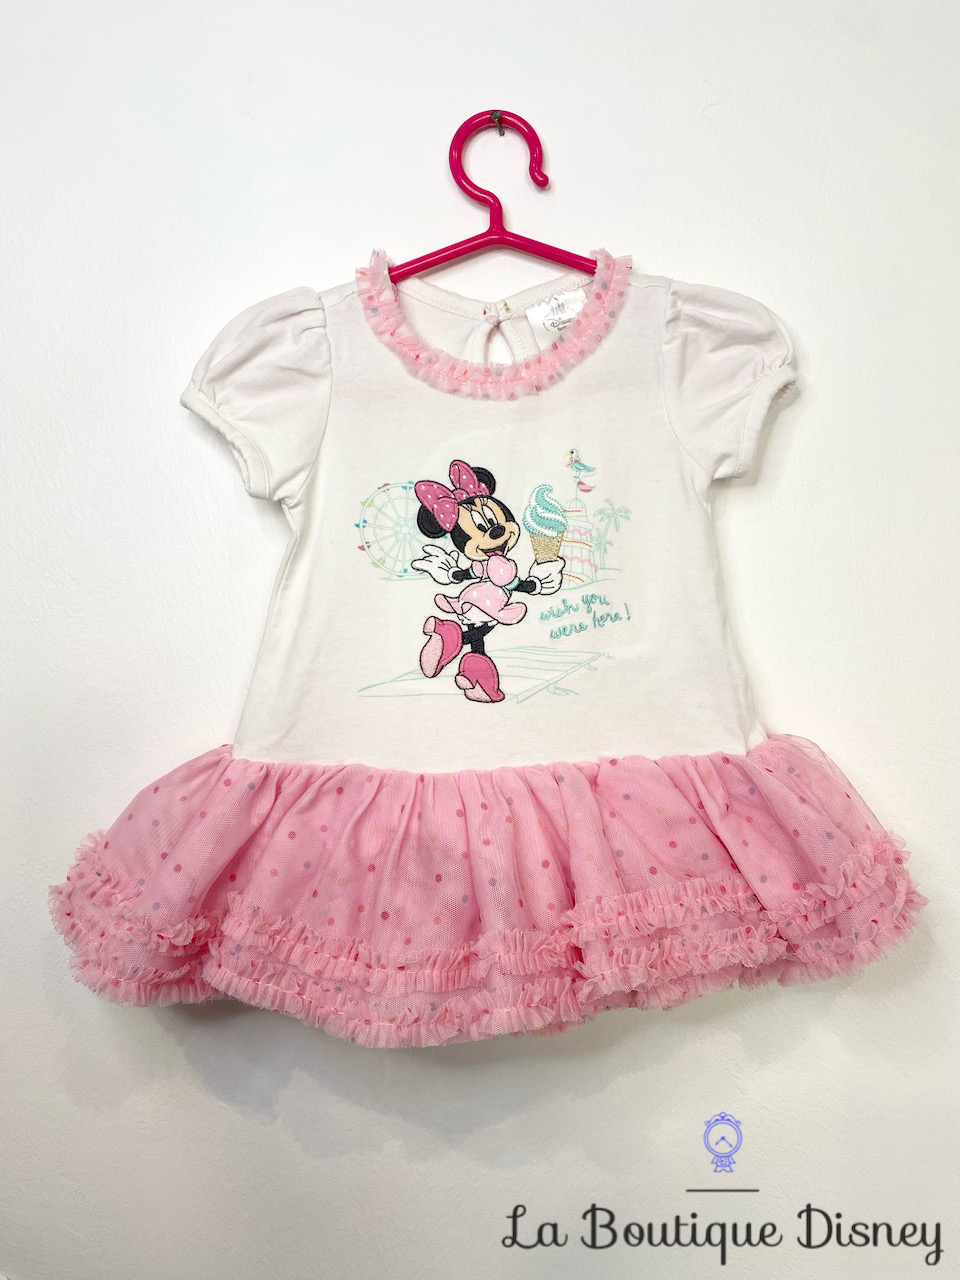 Robe Minnie Mouse Disney Baby by Disney Store taille 6-9 mois tutu rose glace Wish you were here